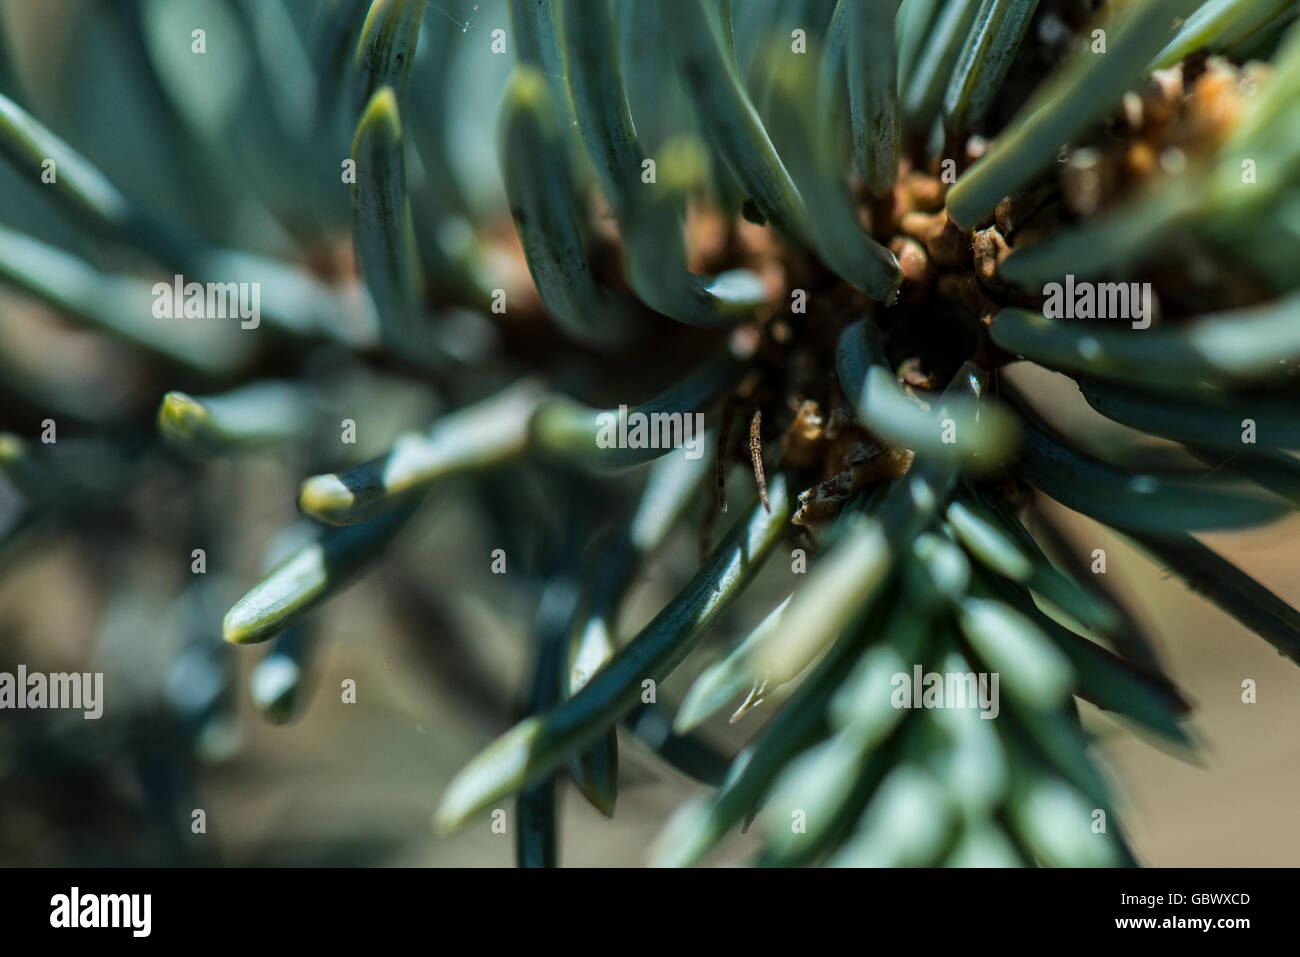 A close up of the leaves of a blue spruce (Picea pungens) with the legs of a hidden spider just visable Stock Photo